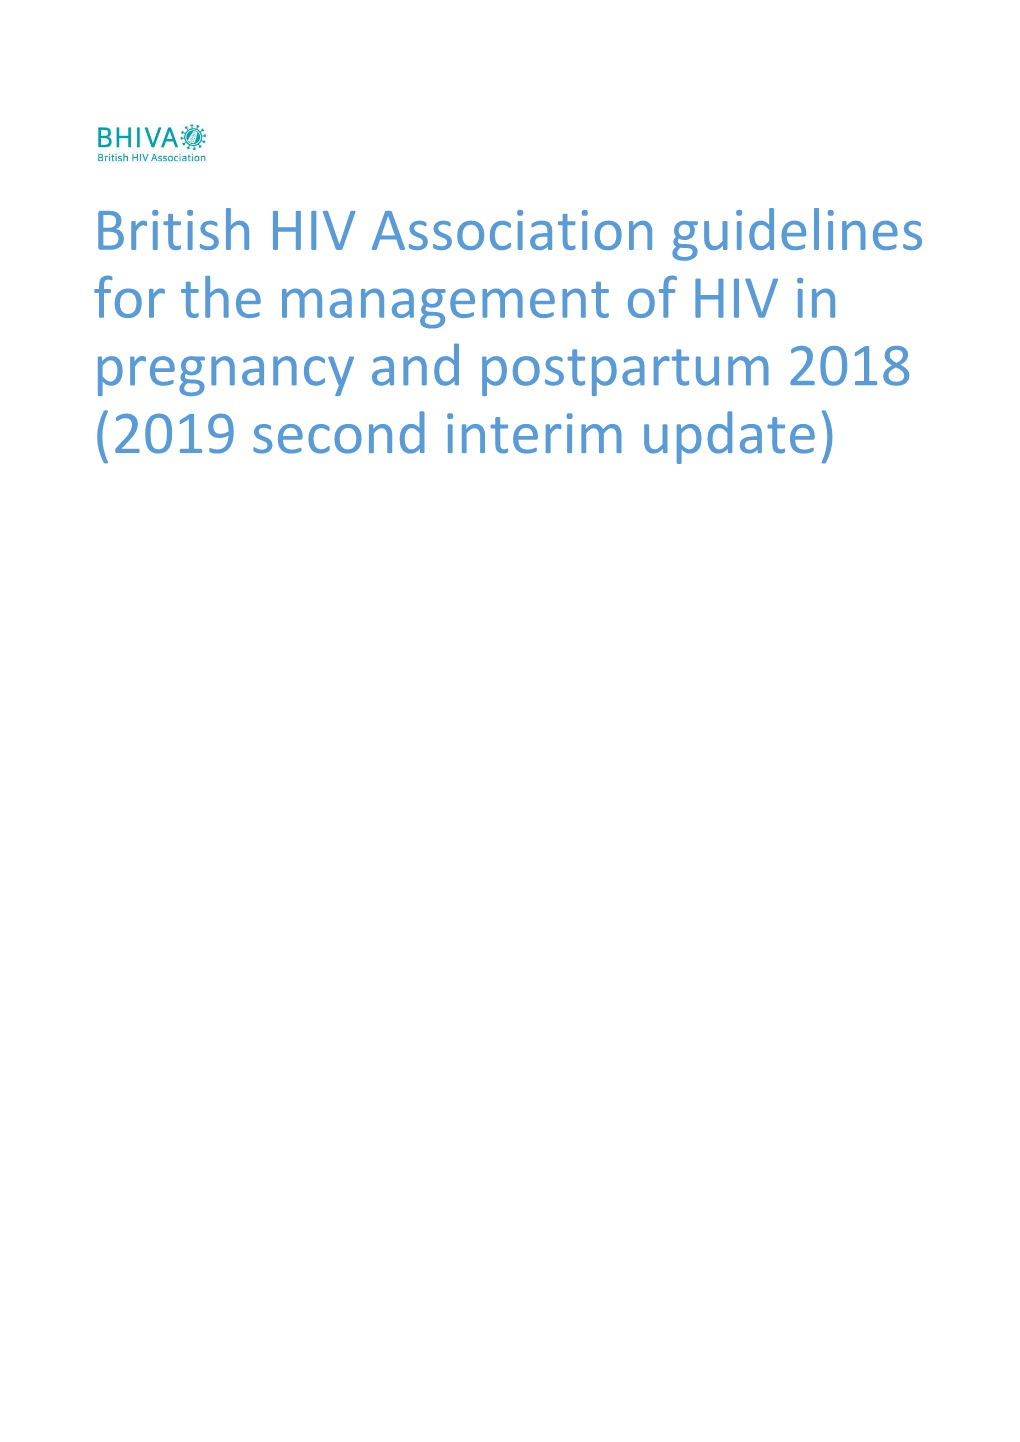 British HIV Association Guidelines for the Management of HIV in Pregnancy and Postpartum 2018 (2019 Second Interim Update)